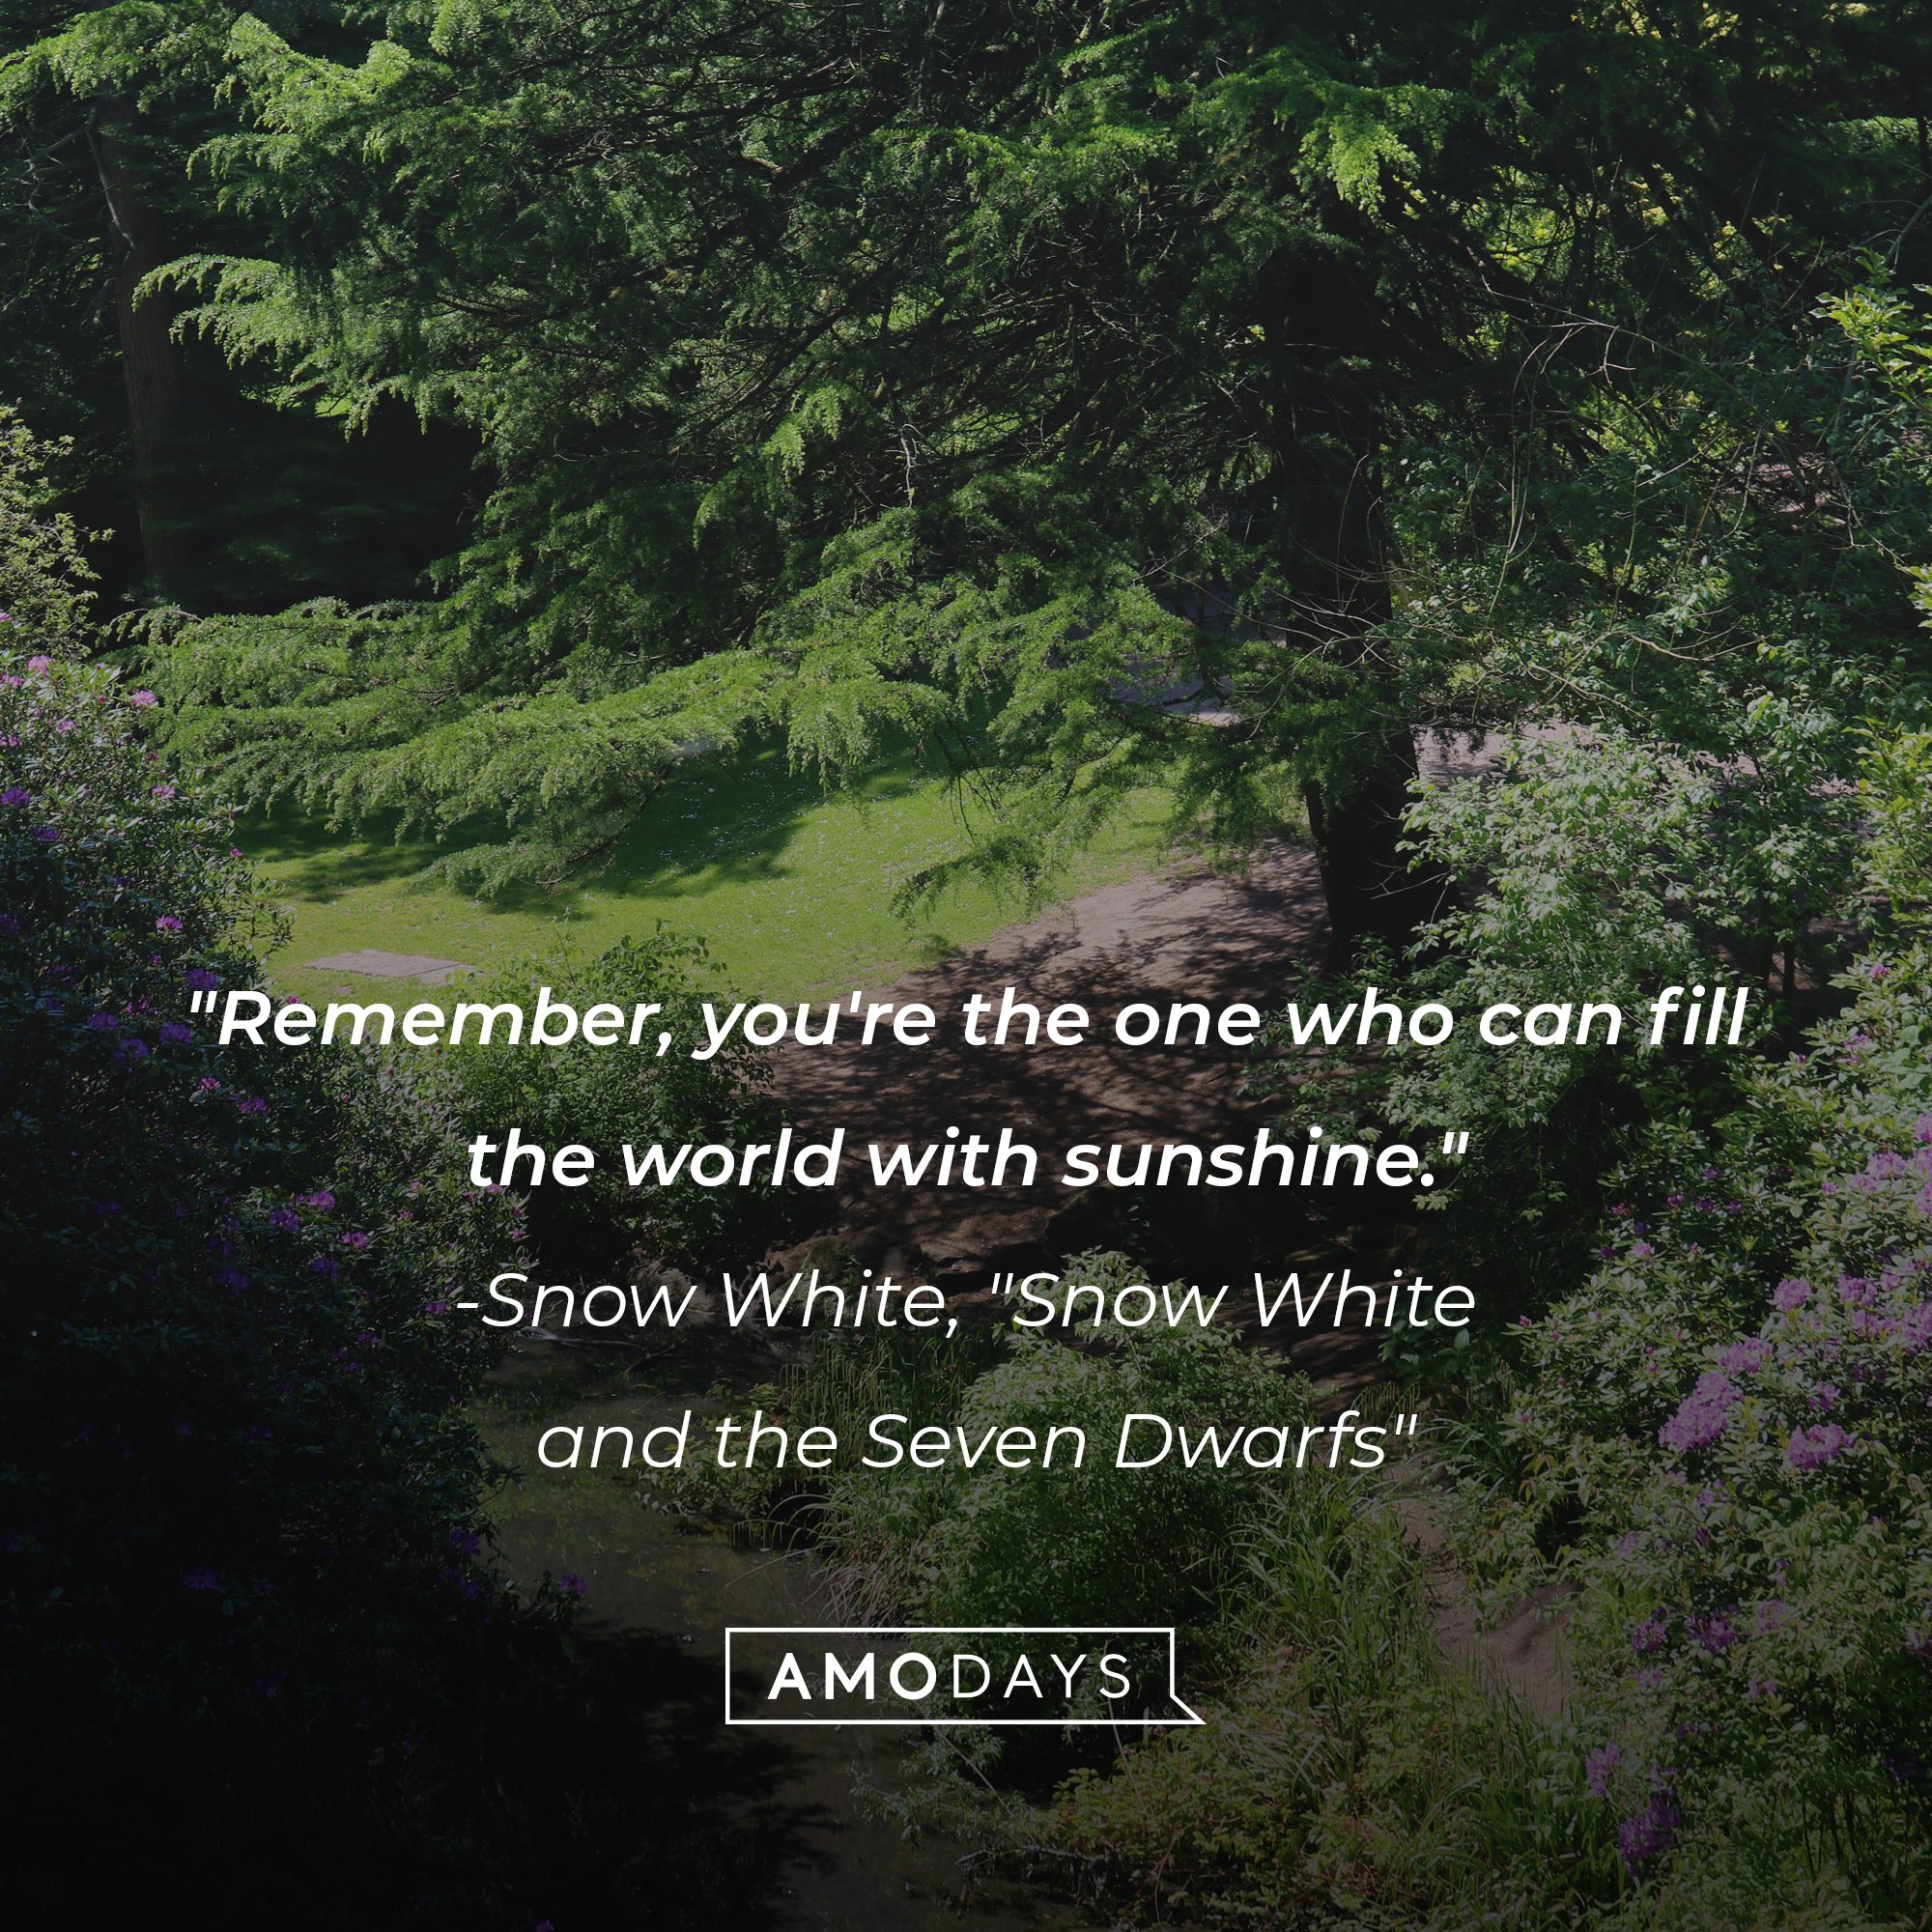 Snow White's quote: "Remember, you're the one who can fill the world with sunshine." | Image: Amo Days